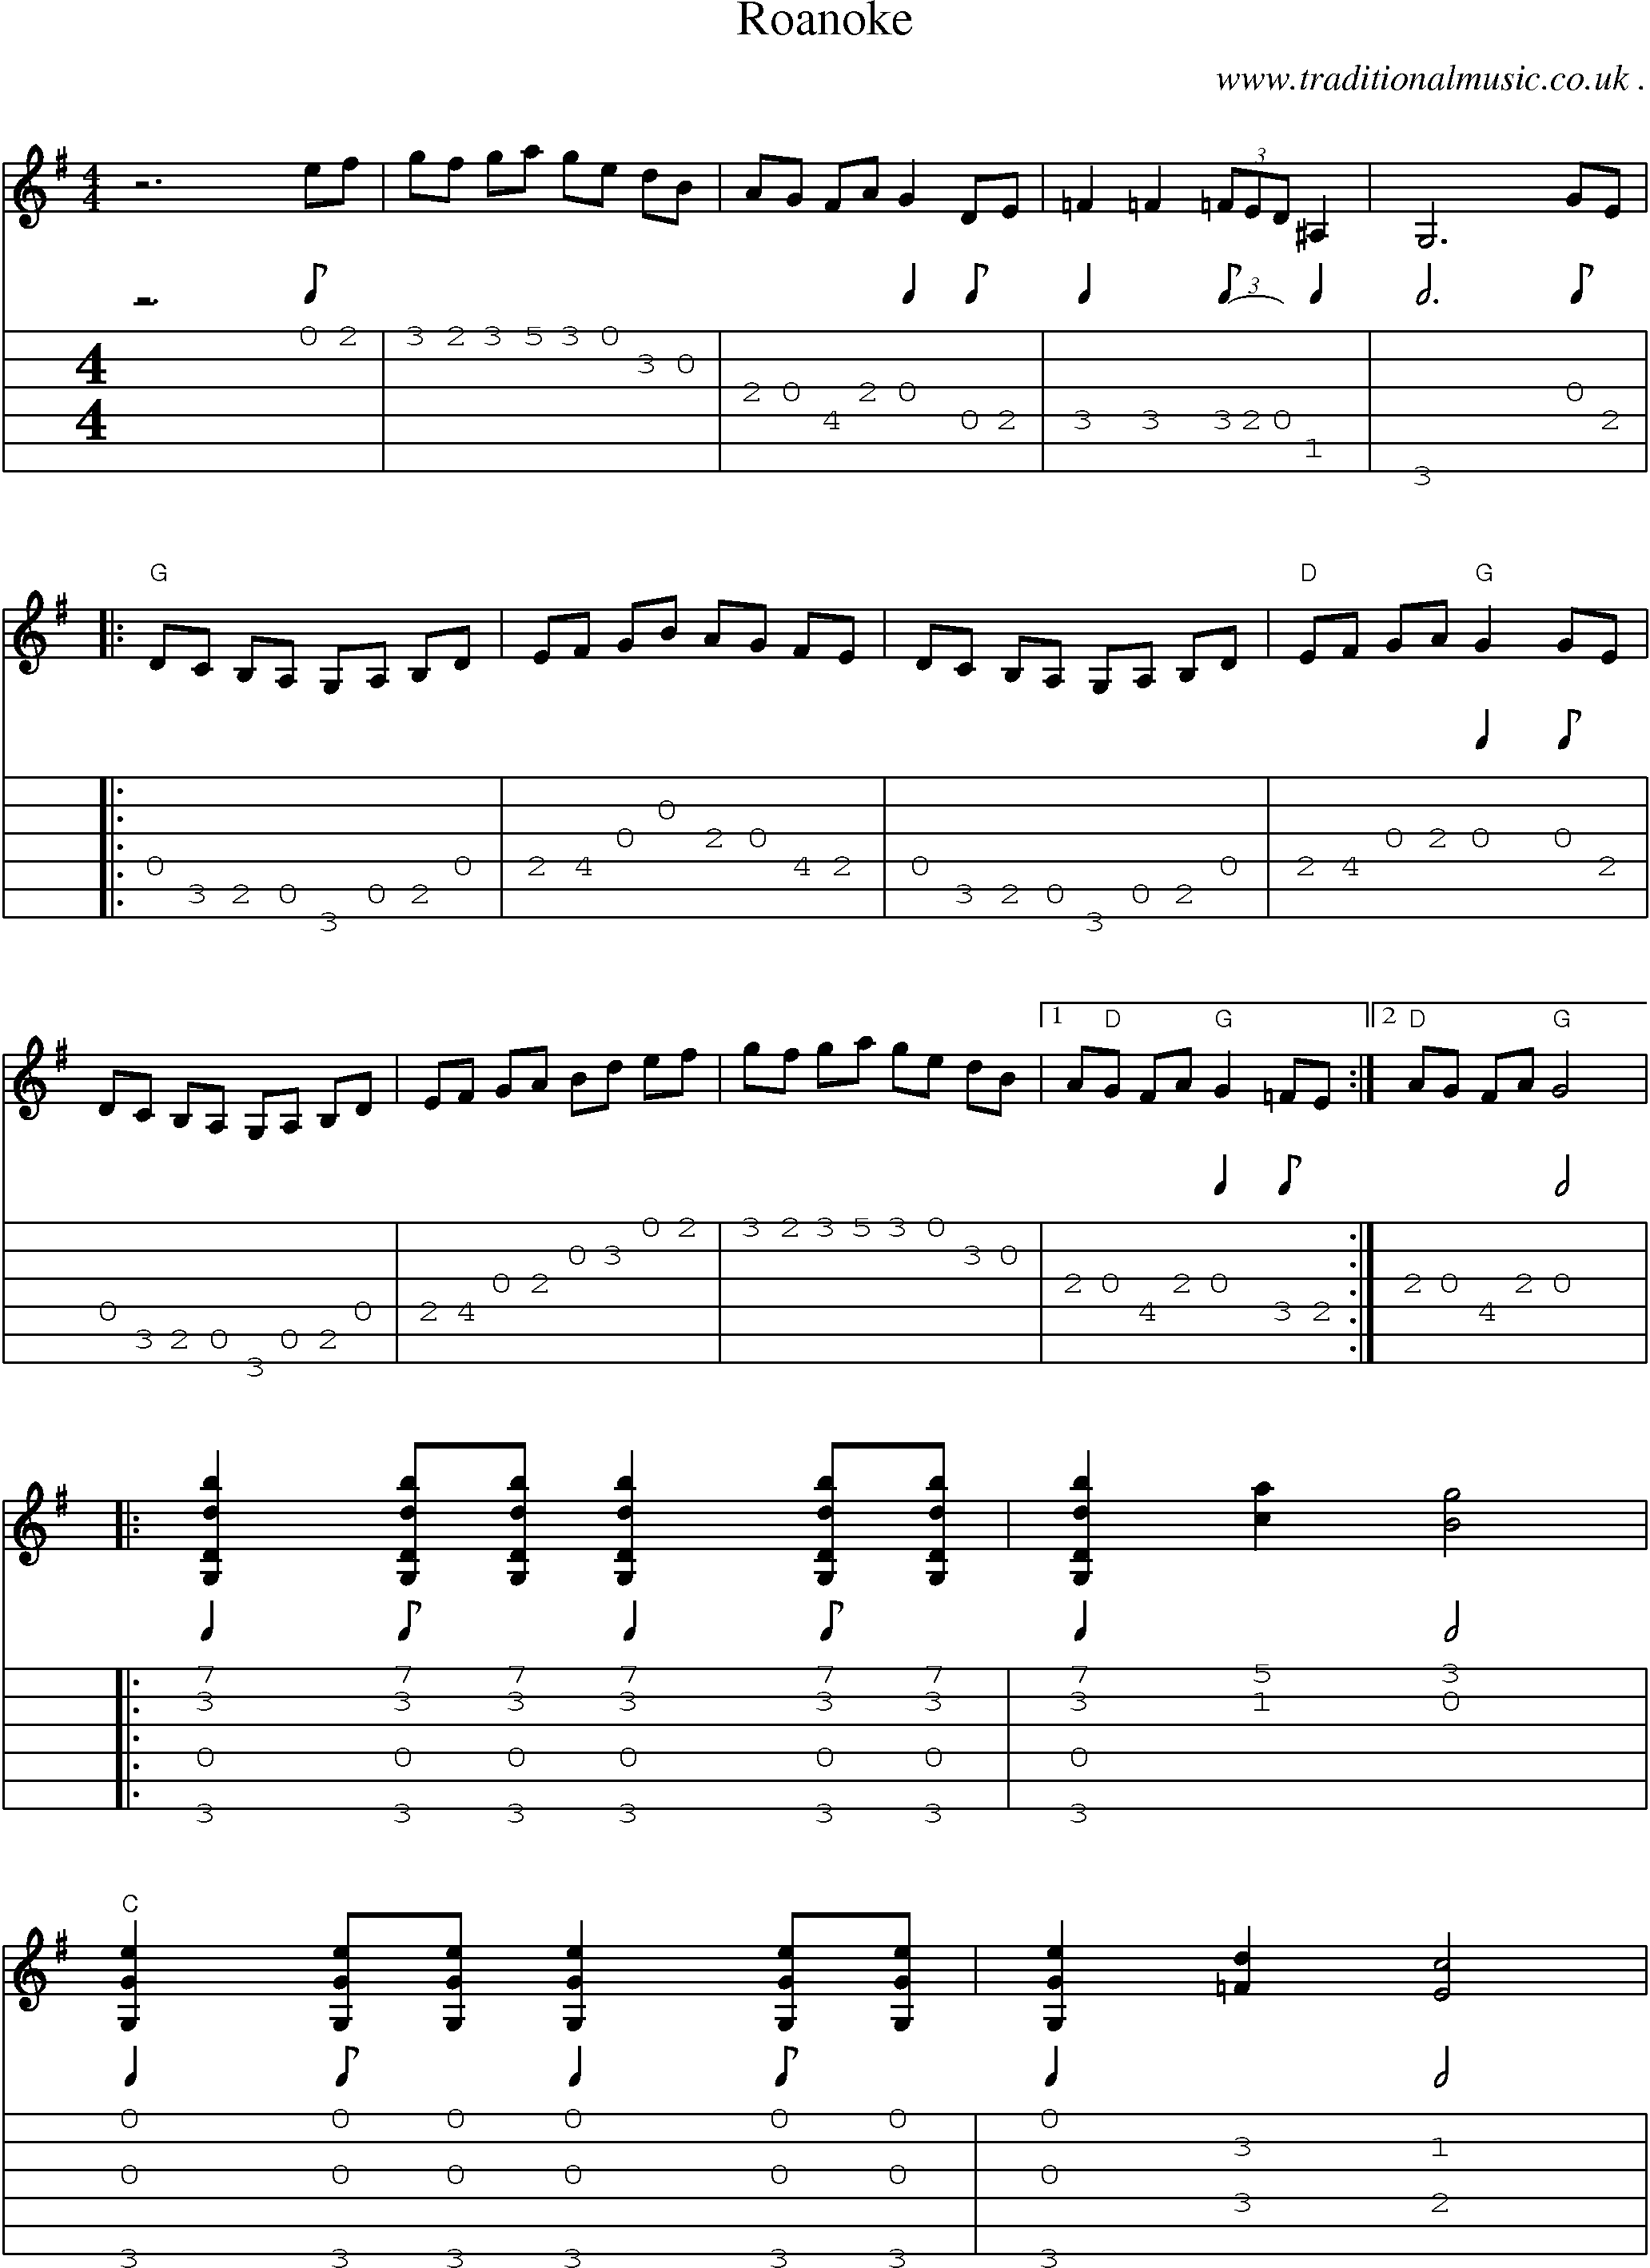 Music Score and Guitar Tabs for Roanoke